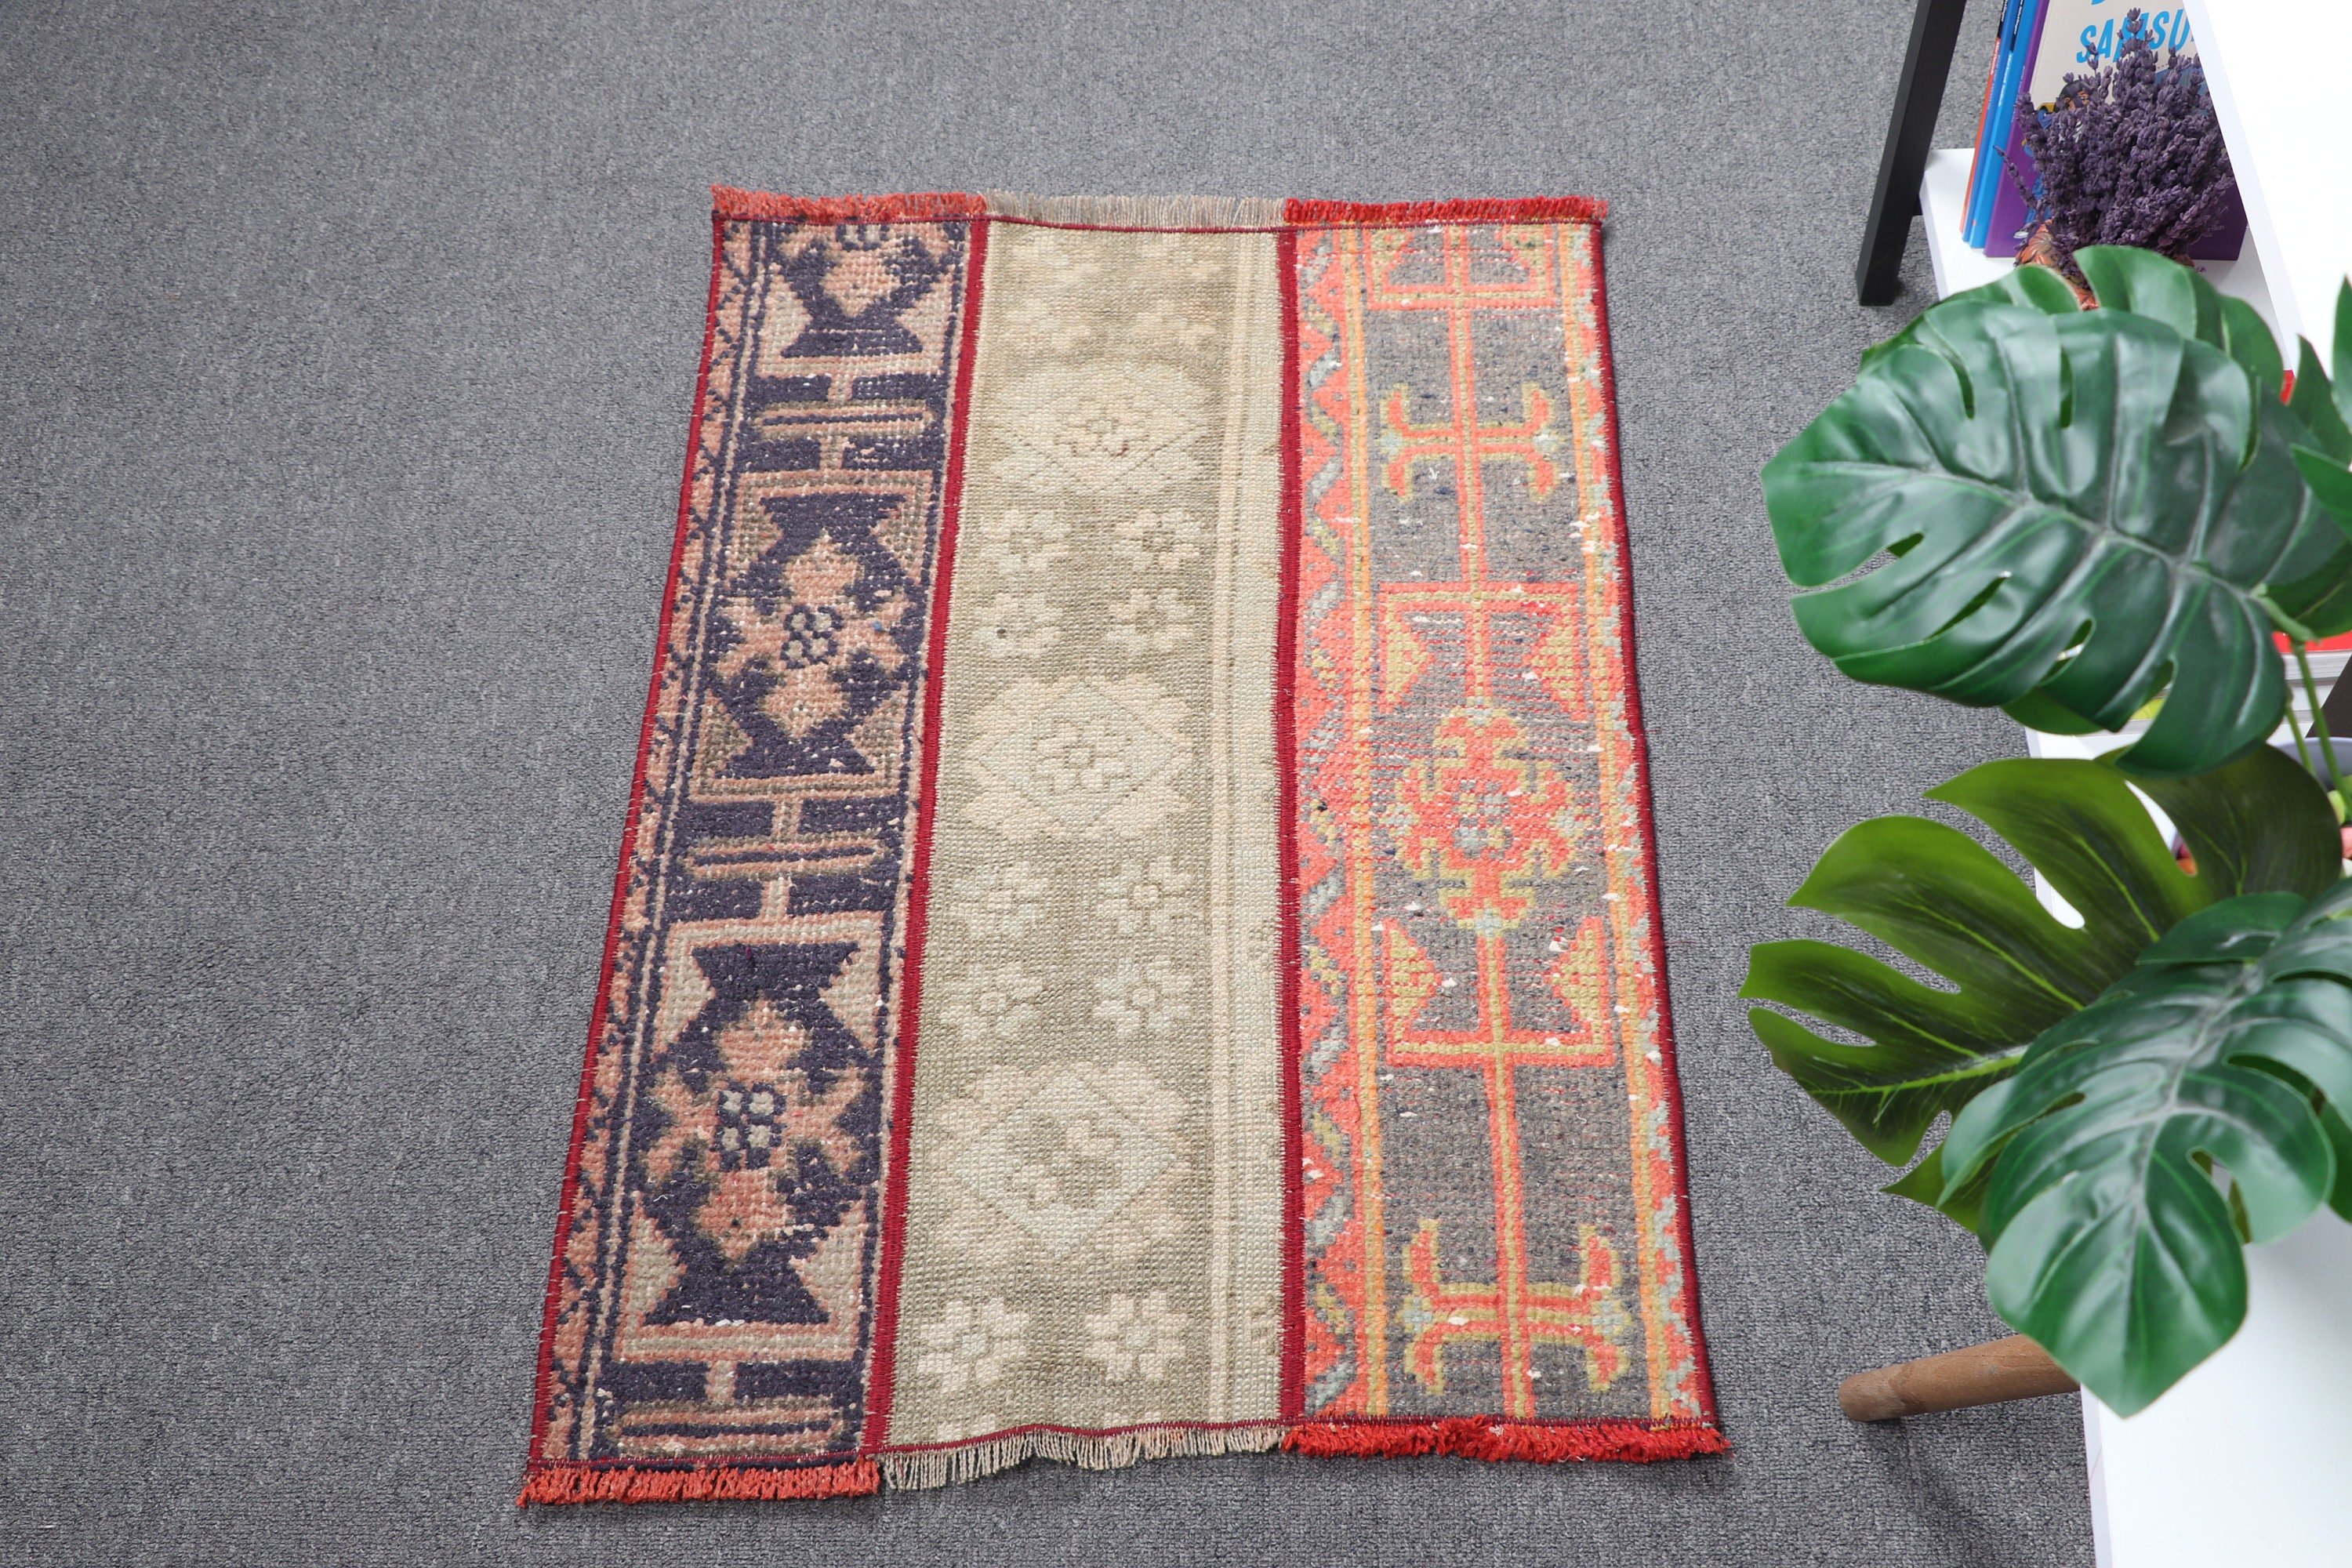 Green Kitchen Rugs, 1.9x2.9 ft Small Rugs, Wool Rugs, Vintage Rugs, Entry Rug, Turkish Rugs, Rugs for Car Mat, Cool Rug, Door Mat Rug